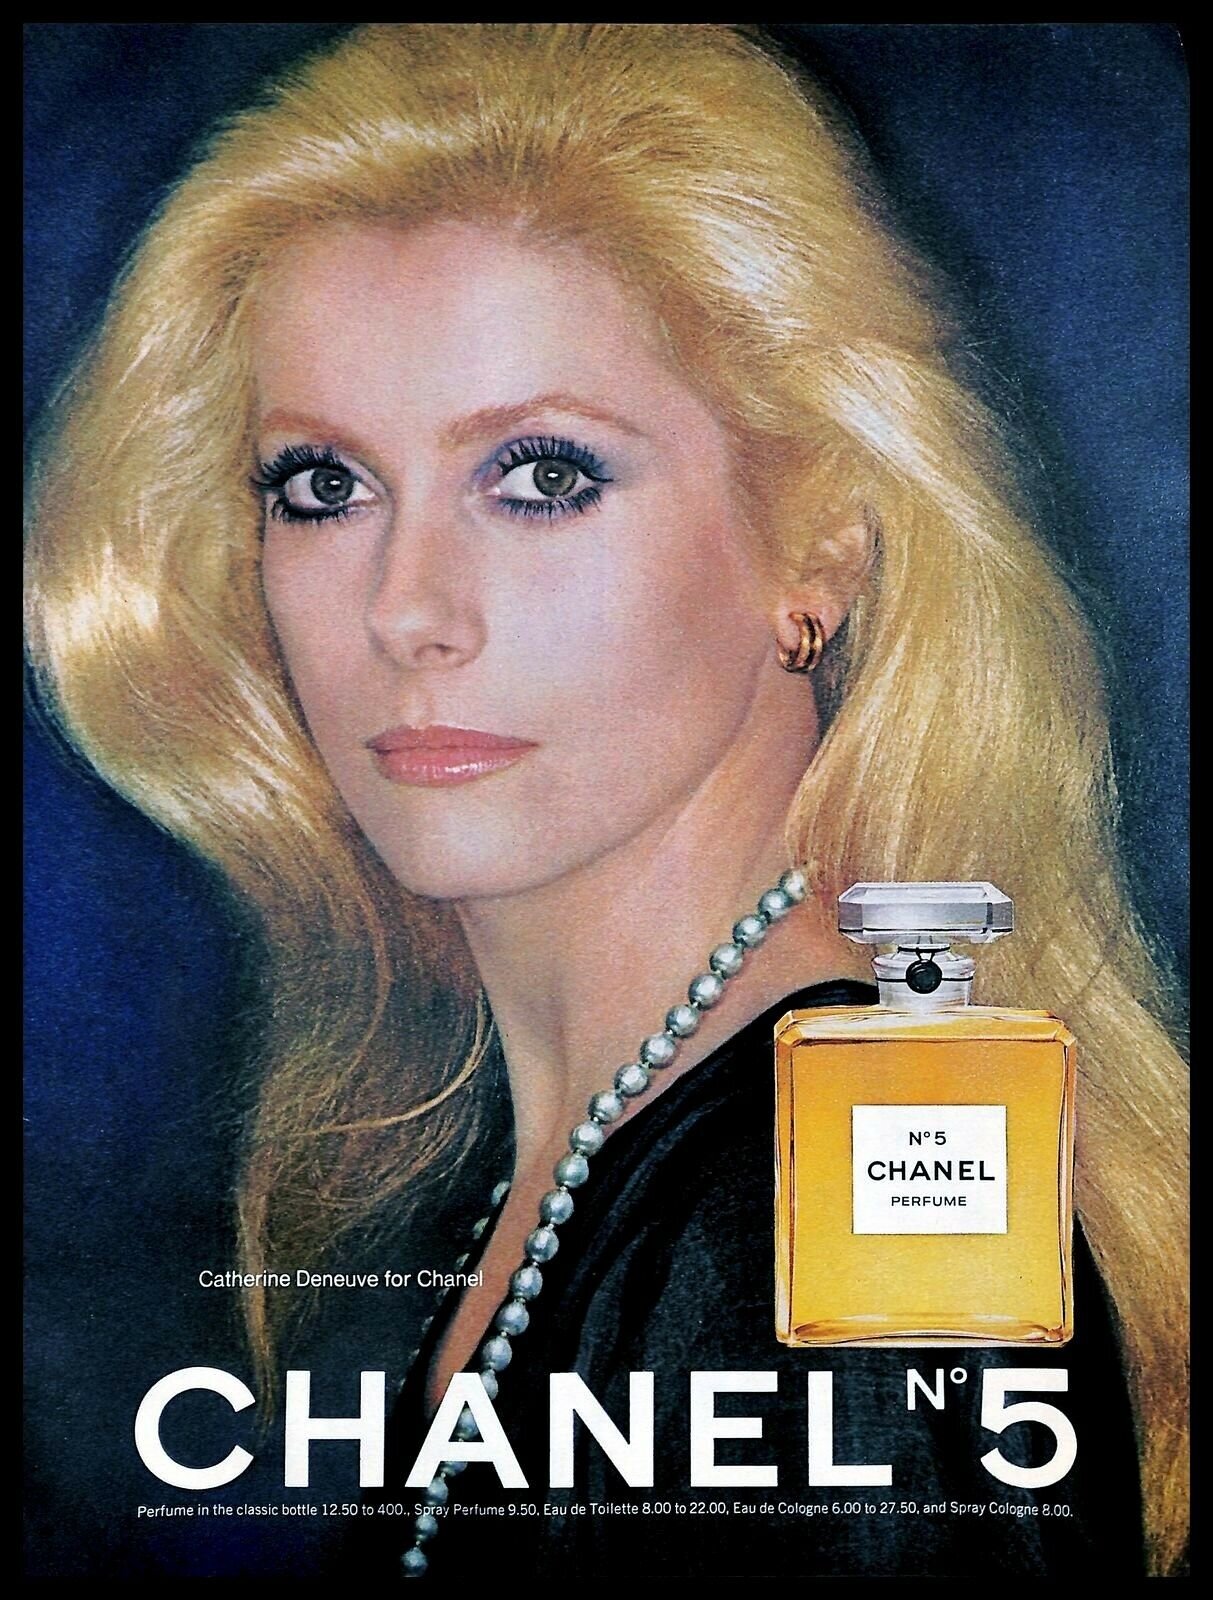 100 Years in Ads : Chanel Nº5 — Dossier Magazine